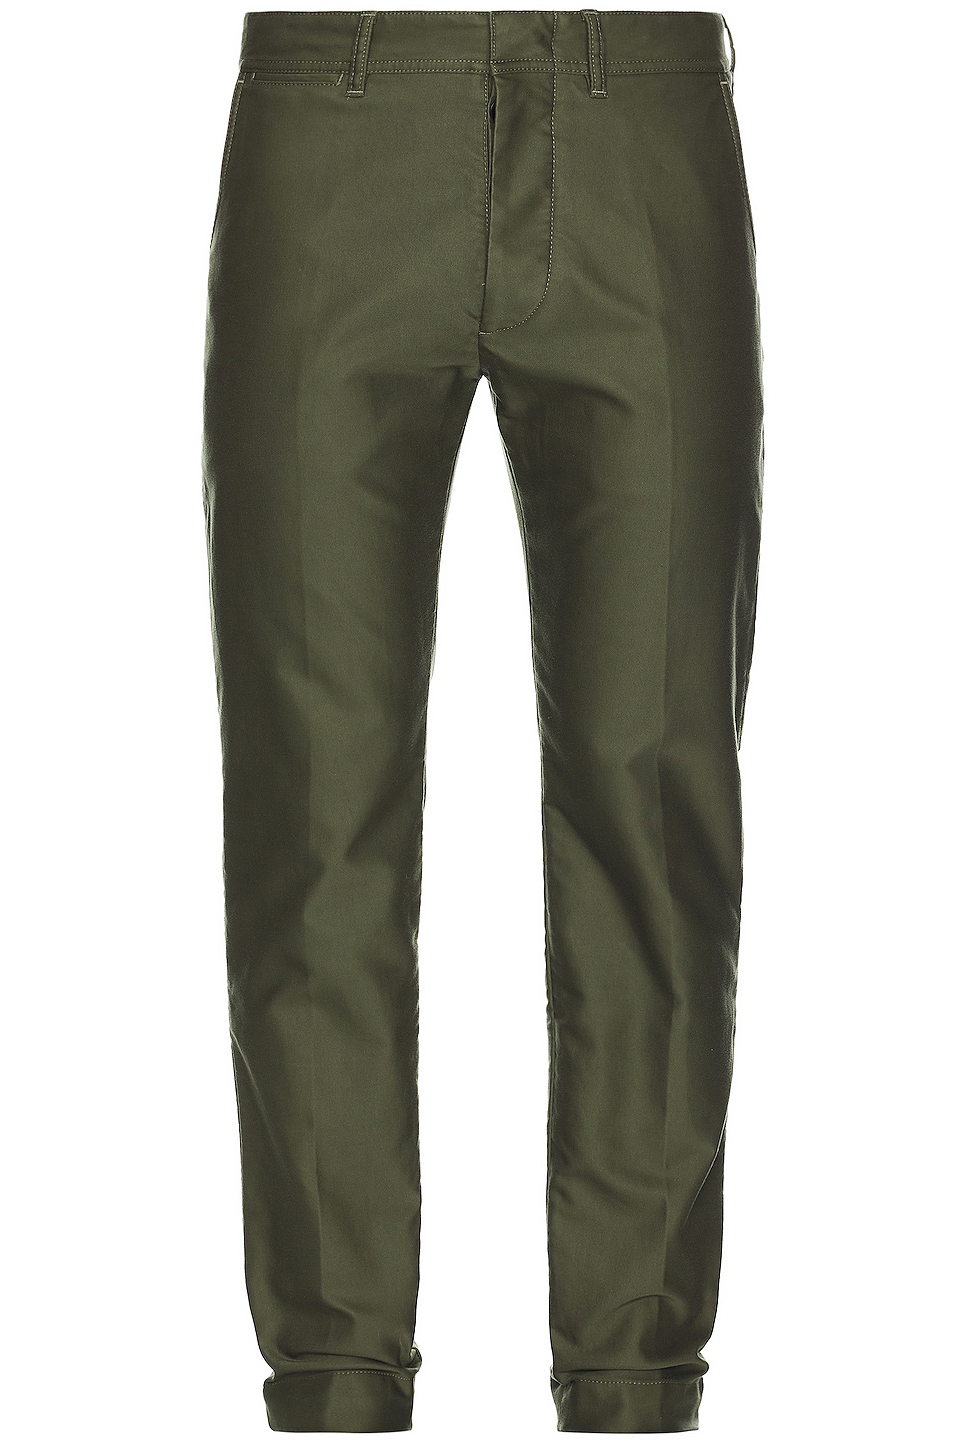 Image 1 of TOM FORD Compact Cotton Chino Pant in Emerald